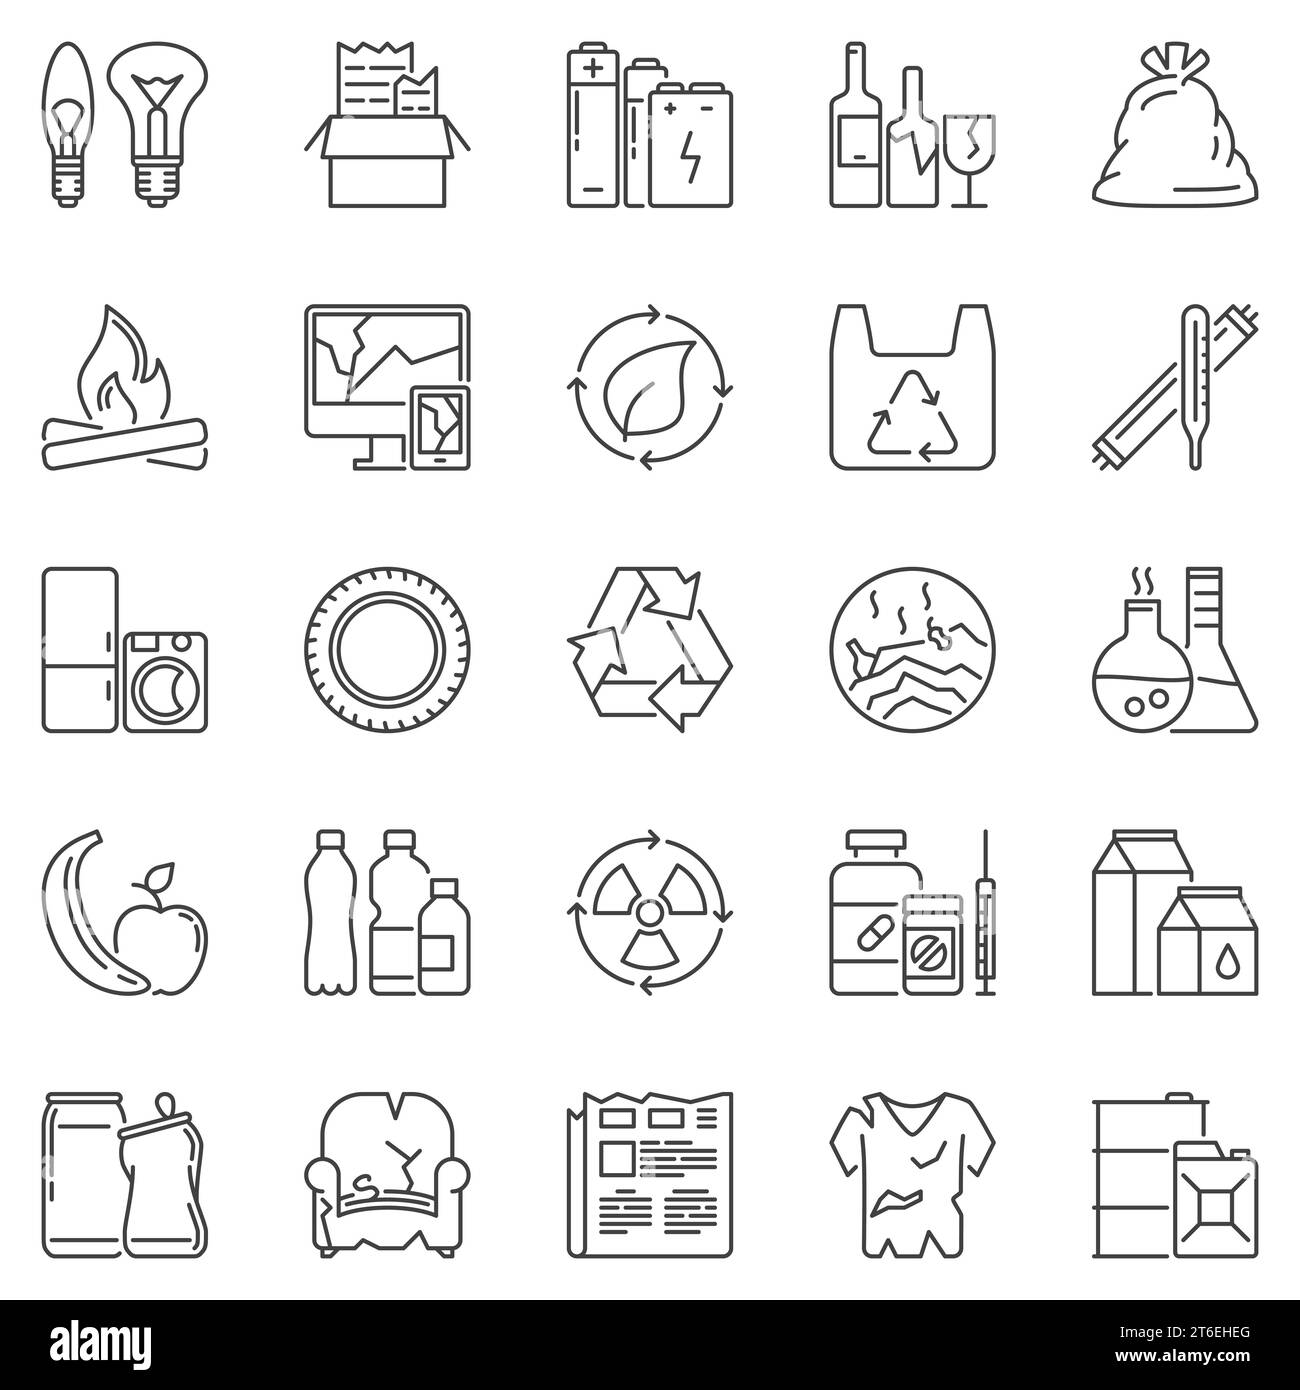 Garbage Types outline icons set - Waste Sorting vector concept symbols. Paper, Plastic, Organic, Glass, E-Waste Recycling linear signs Stock Vector